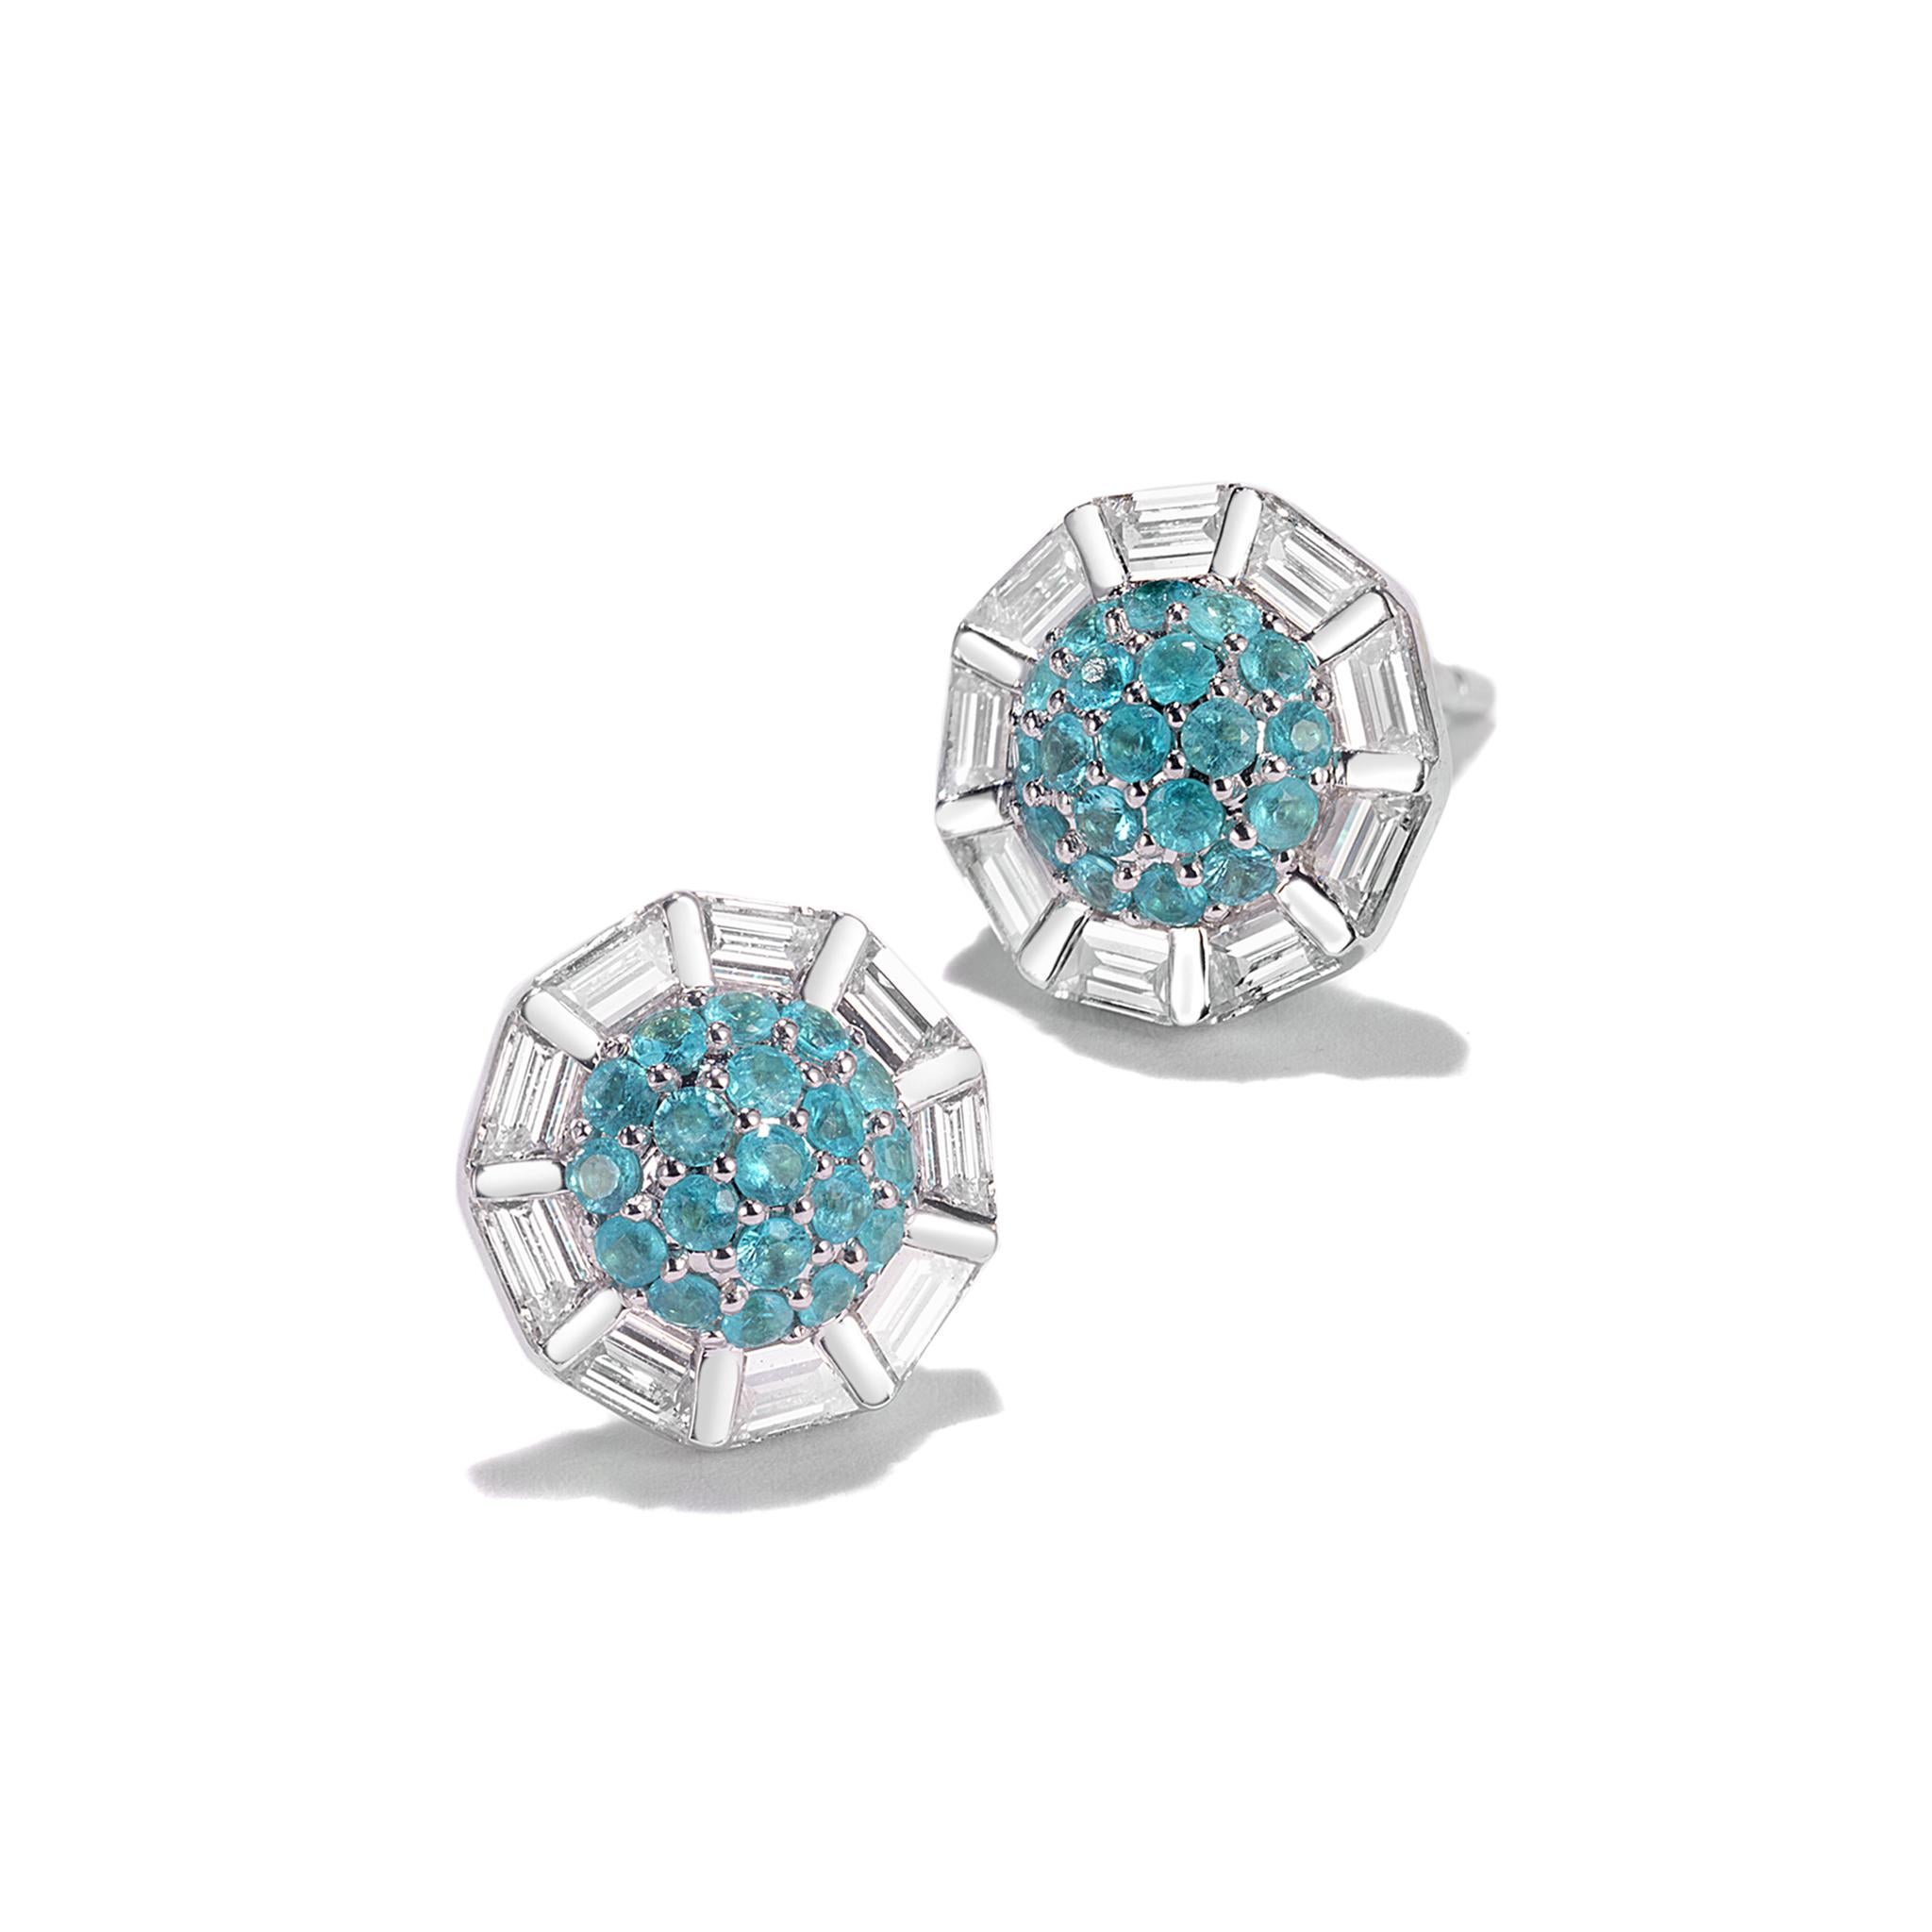 Trinity collection stud earrings set in 18K white gold with 0.41cts faceted paraiba and 0.64cts diamond.
